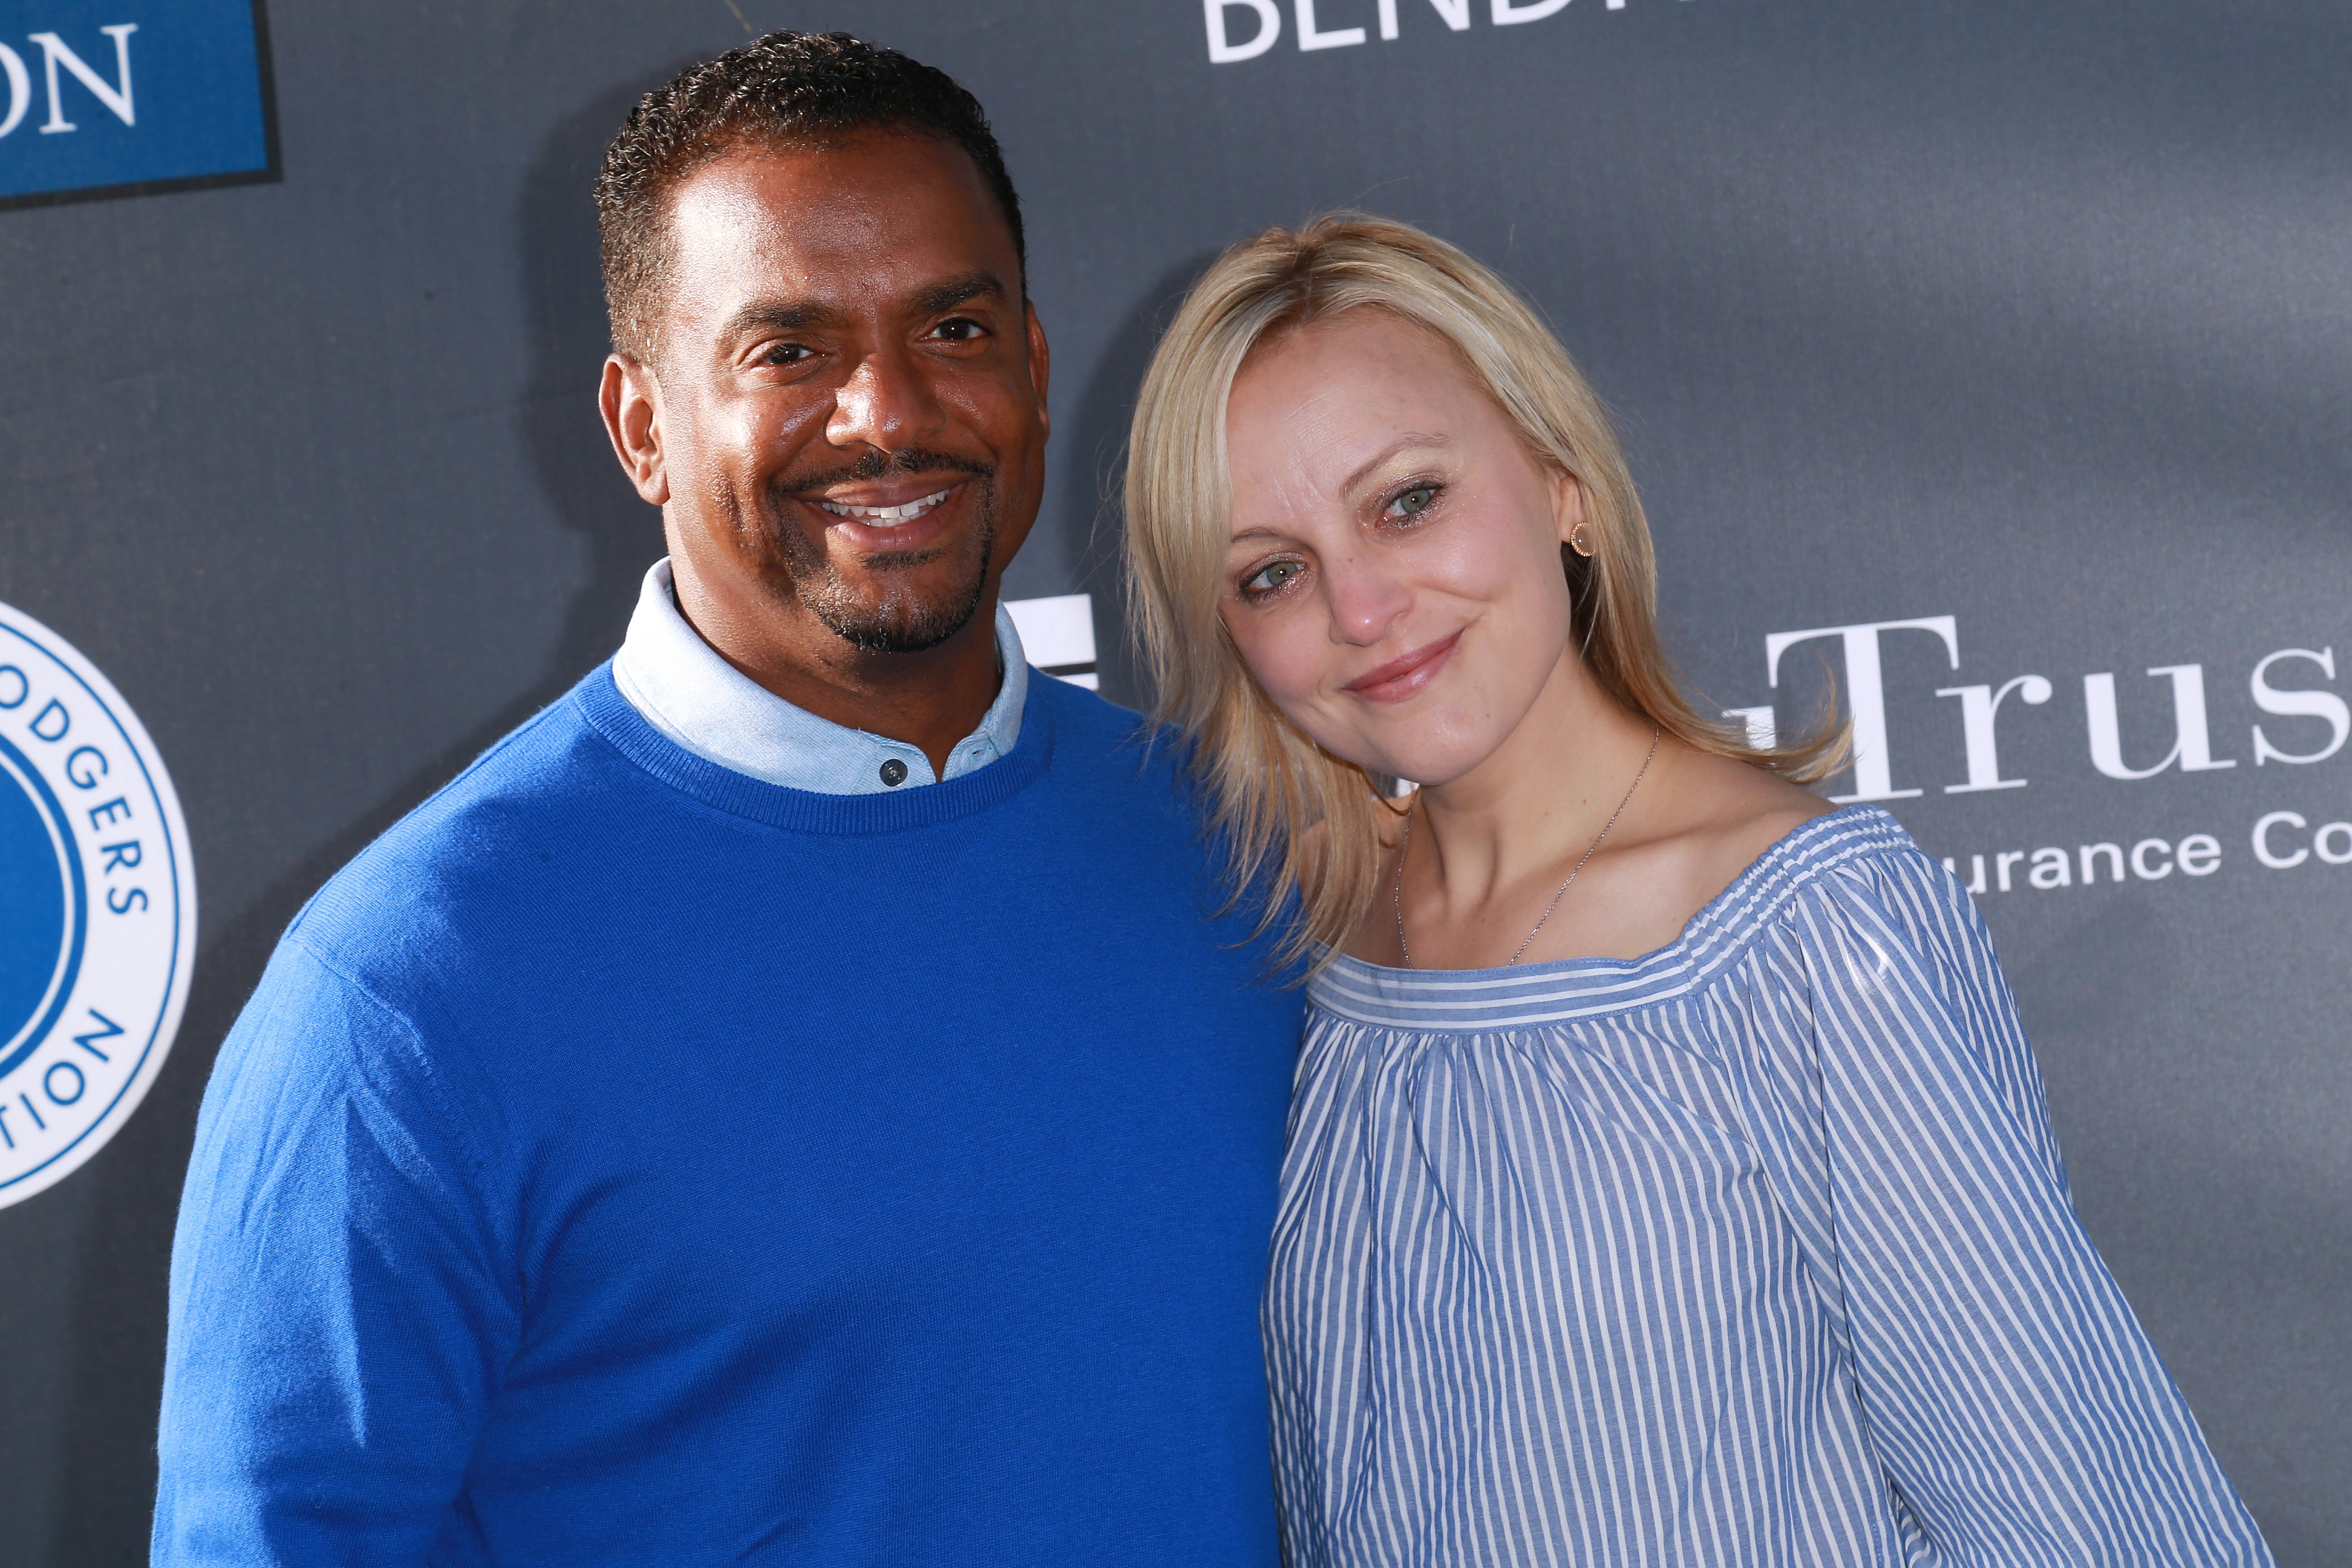 Actor Alfonso Ribeiro and Angela Unkrich attend the Los Angeles Dodgers Foundation's 3rd Annual Blue Diamond Gala at Dodger Stadium on June 8, 2017, in Los Angeles, California.| Source: Getty Images